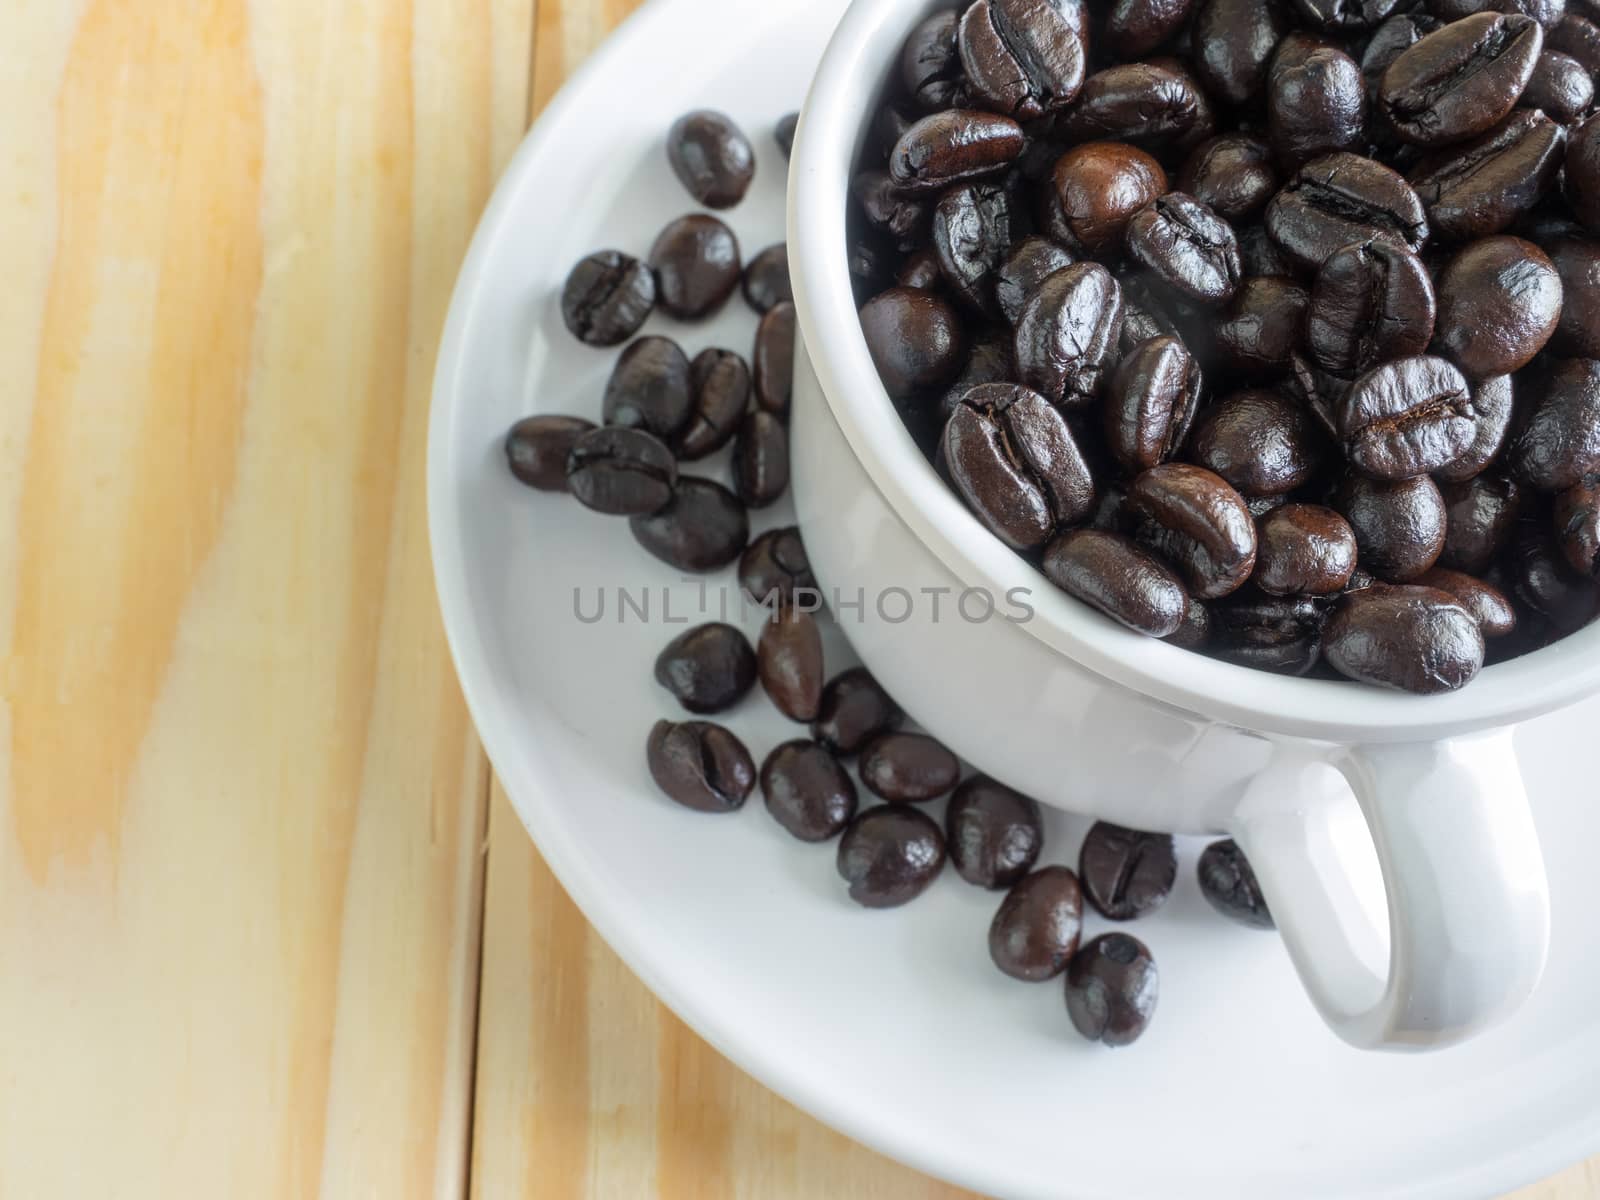 Roasted coffee beans in pretty white cup on wooden table